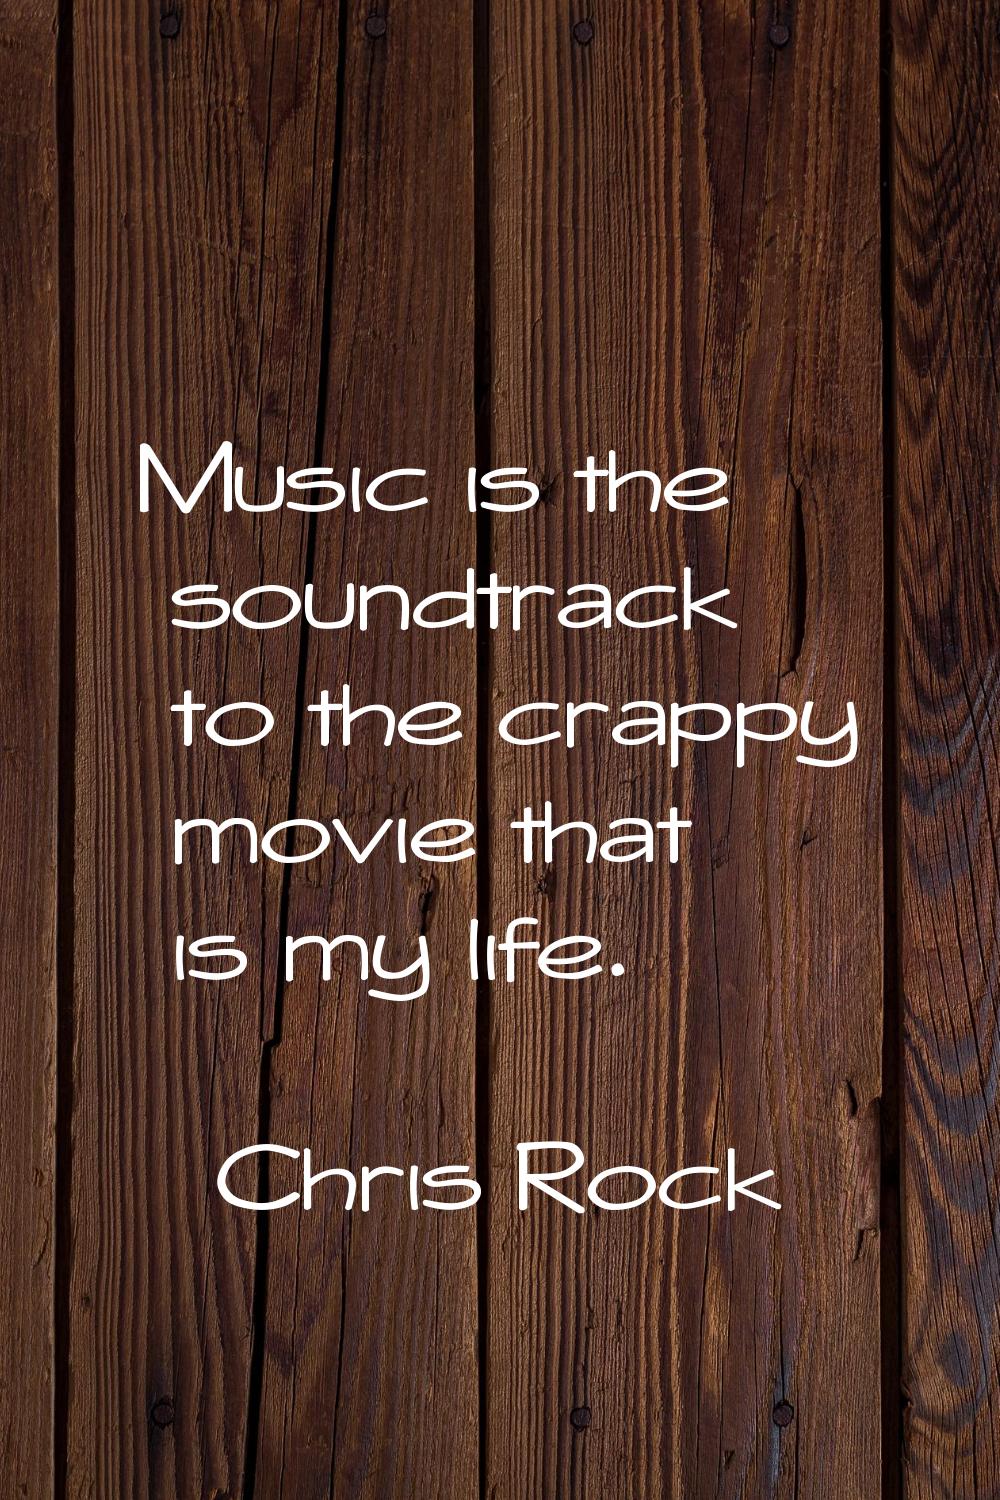 Music is the soundtrack to the crappy movie that is my life.